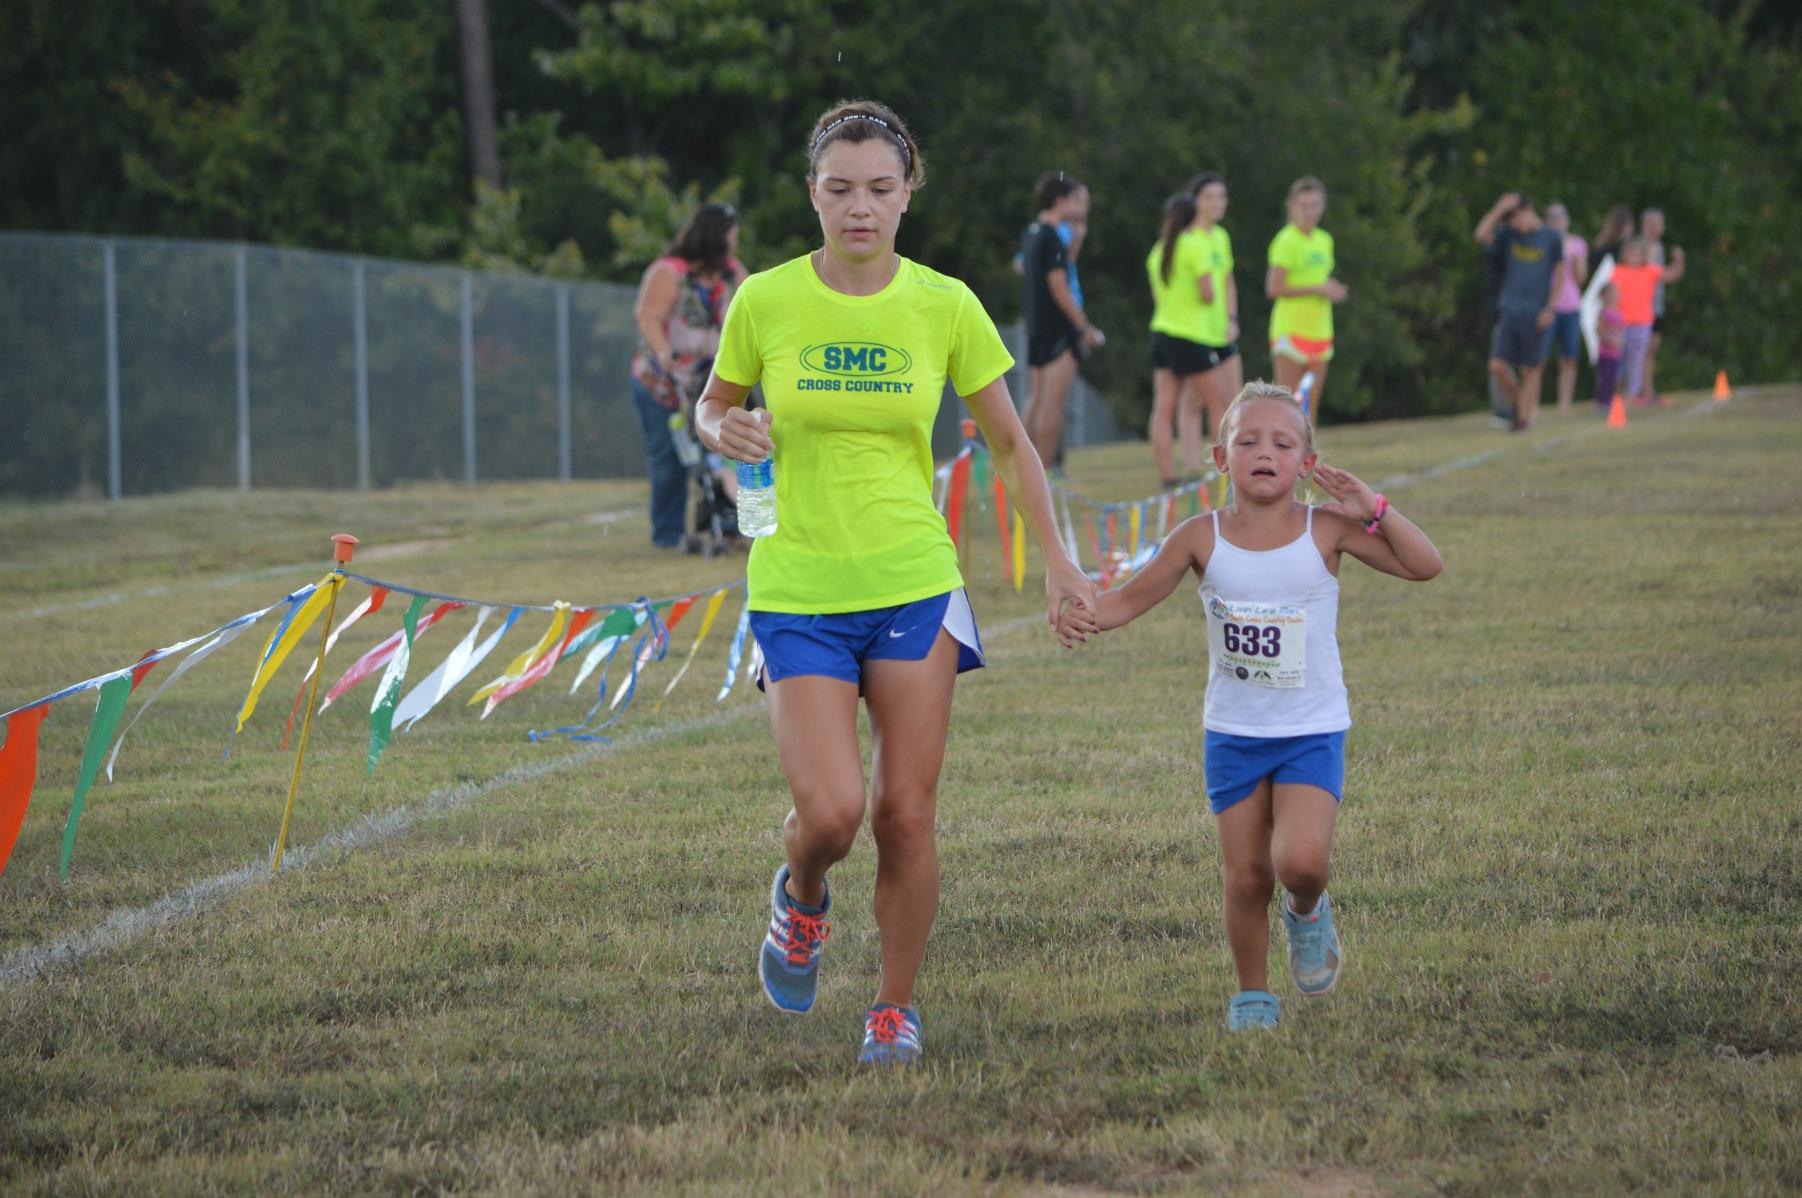 Women's Cross Country Team volunteers at youth event